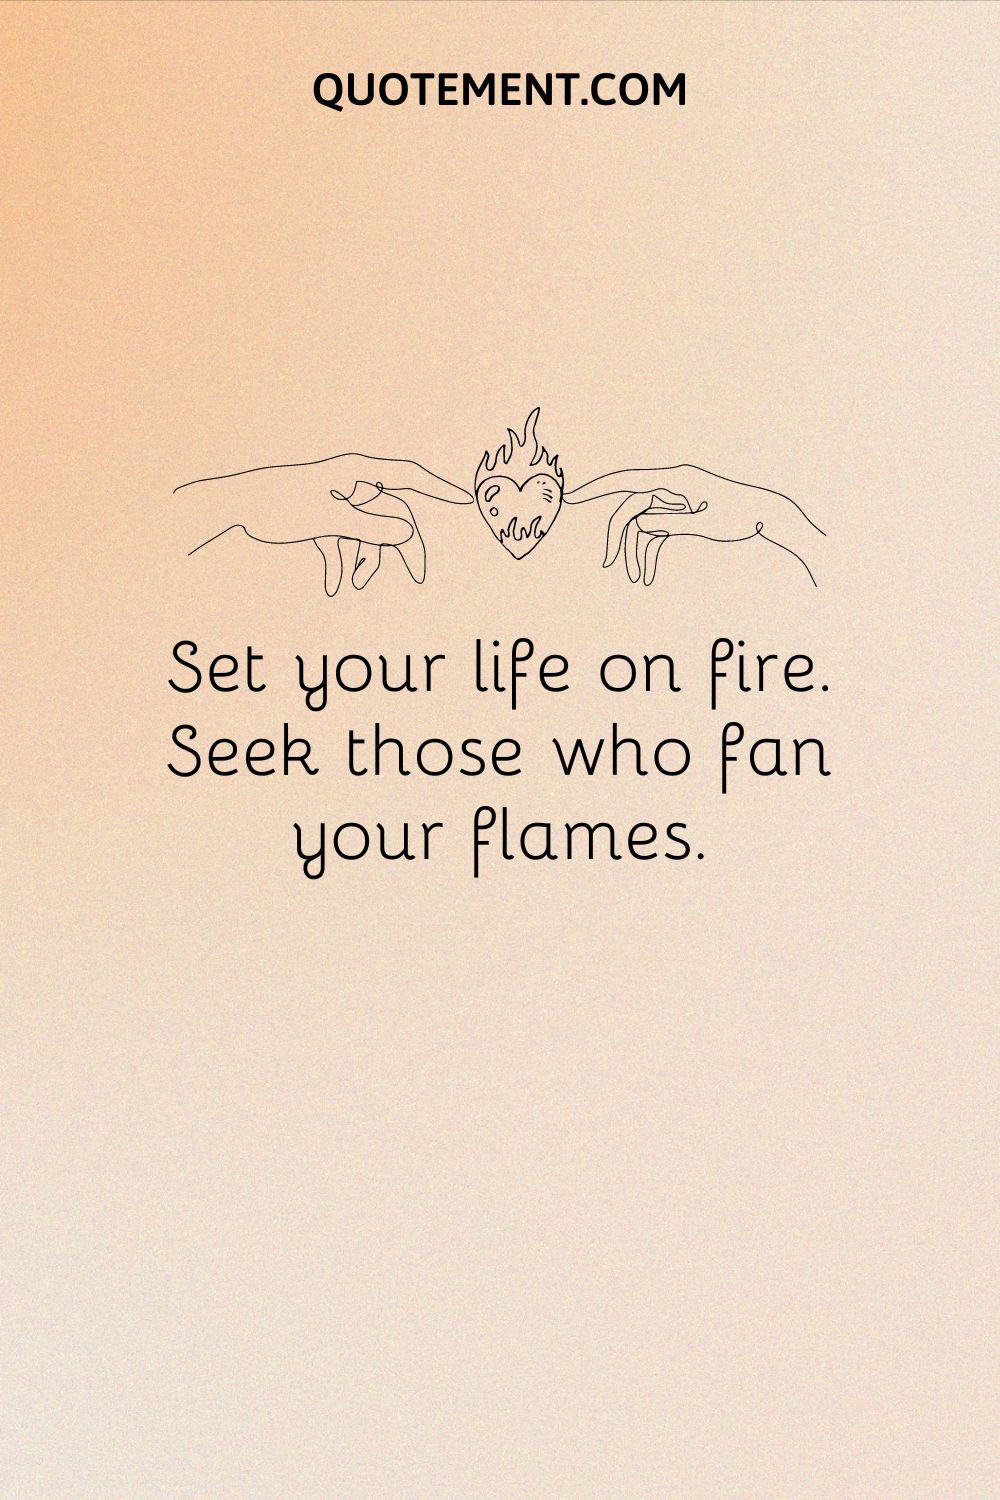 Set your life on fire. Seek those who fan your flames